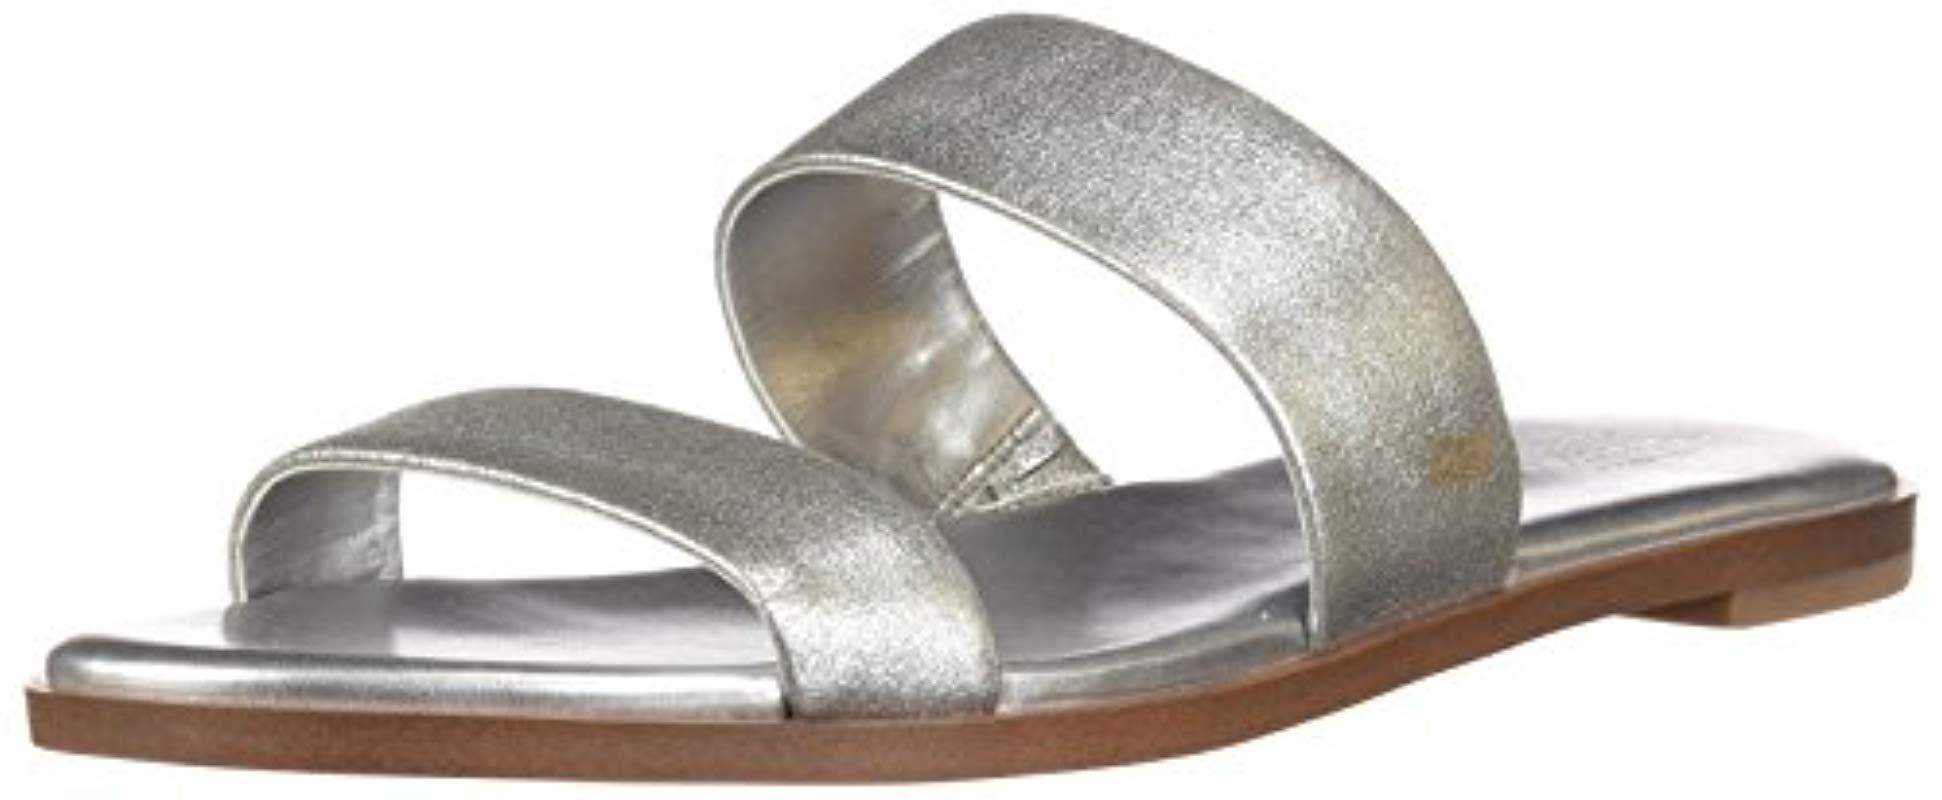 findra sandal cole haan